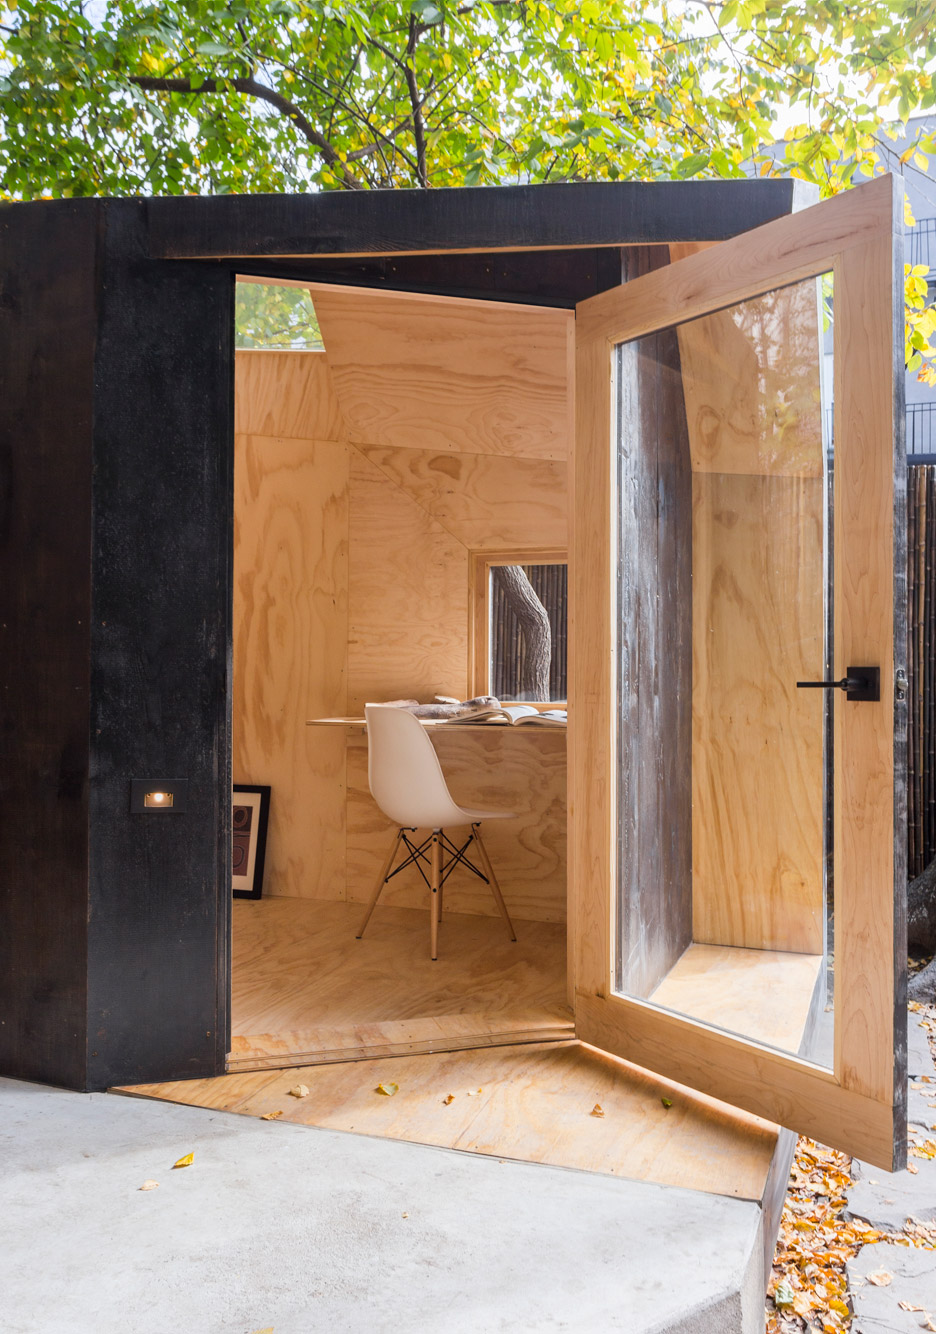 Tiny Writer’s Studio By Architensions Provides A Creative Refuge In Brooklyn